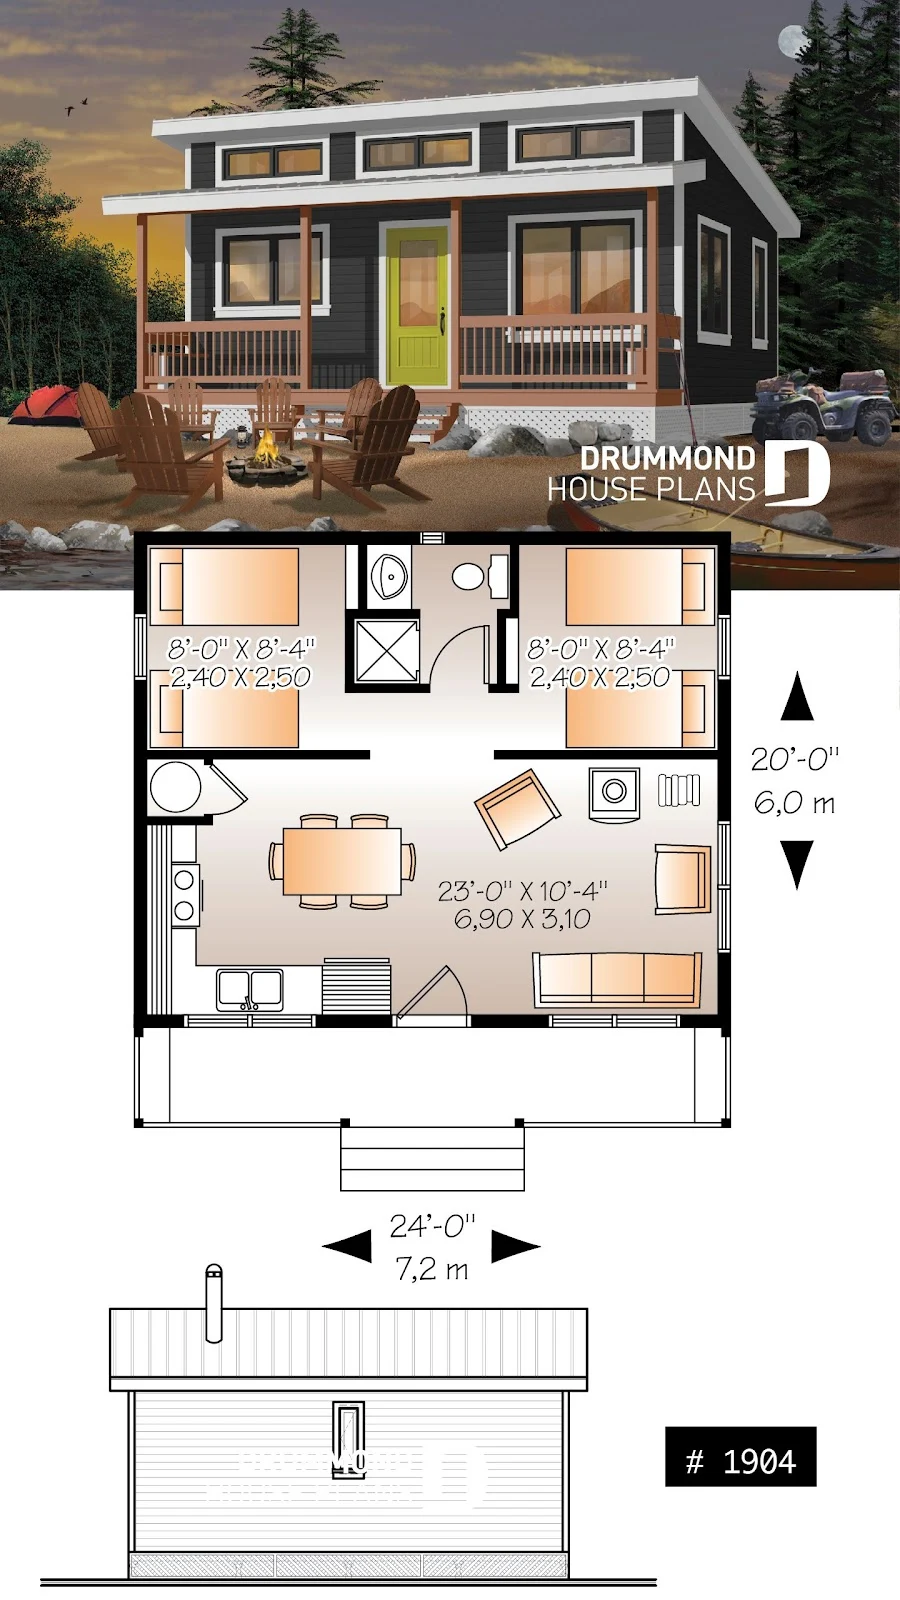 Affordable small 2 bedroom cabin plan, wood stove, open concept